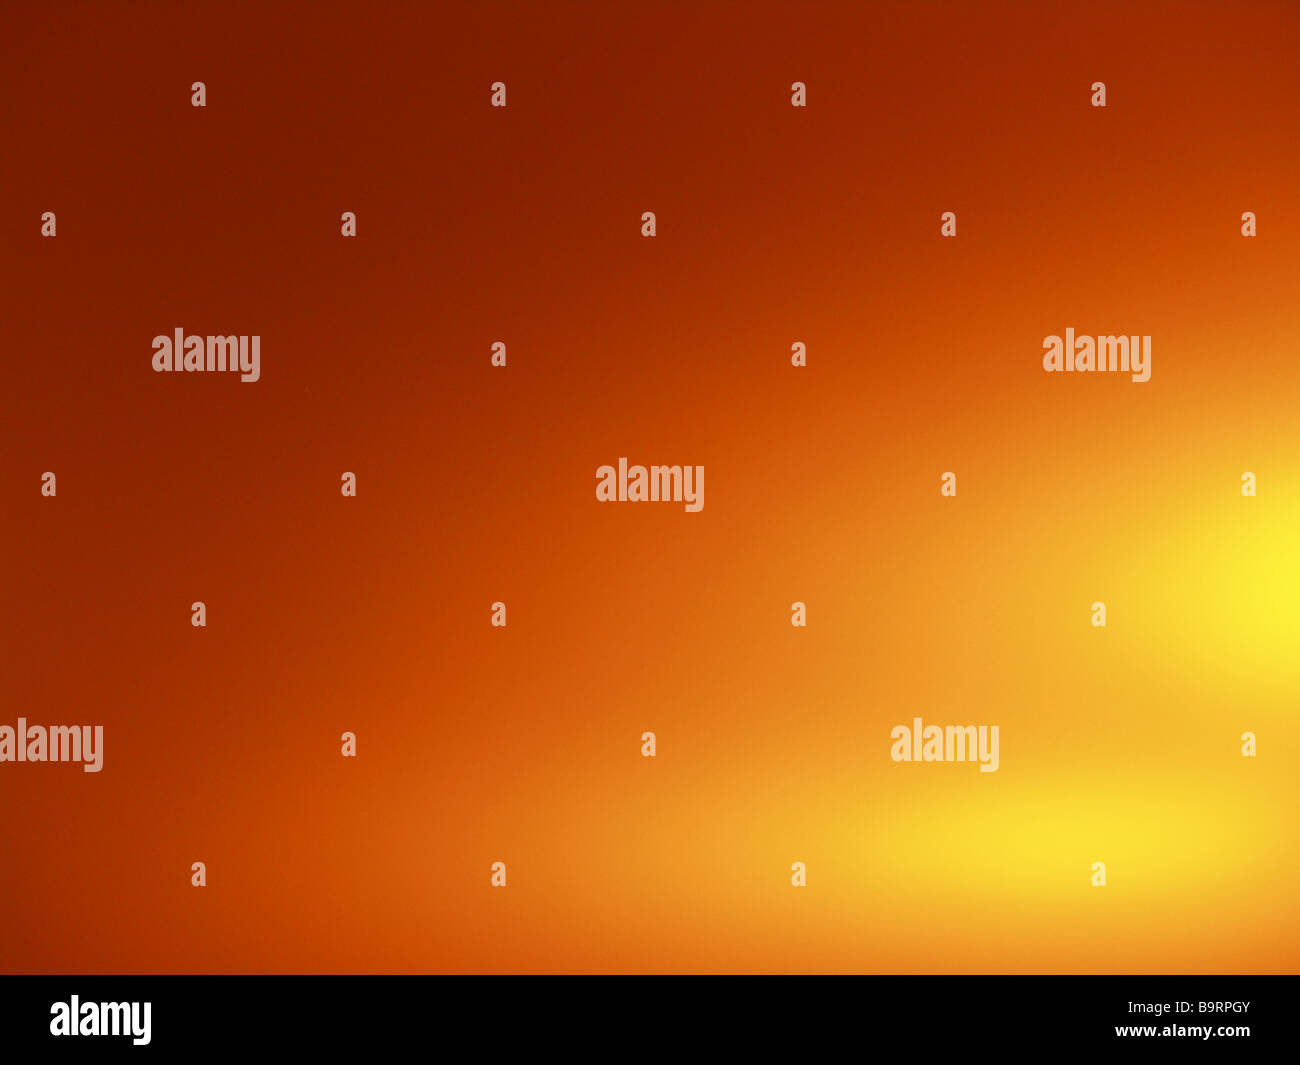 Excelent as background orange for writing or other graphics Stock Photo